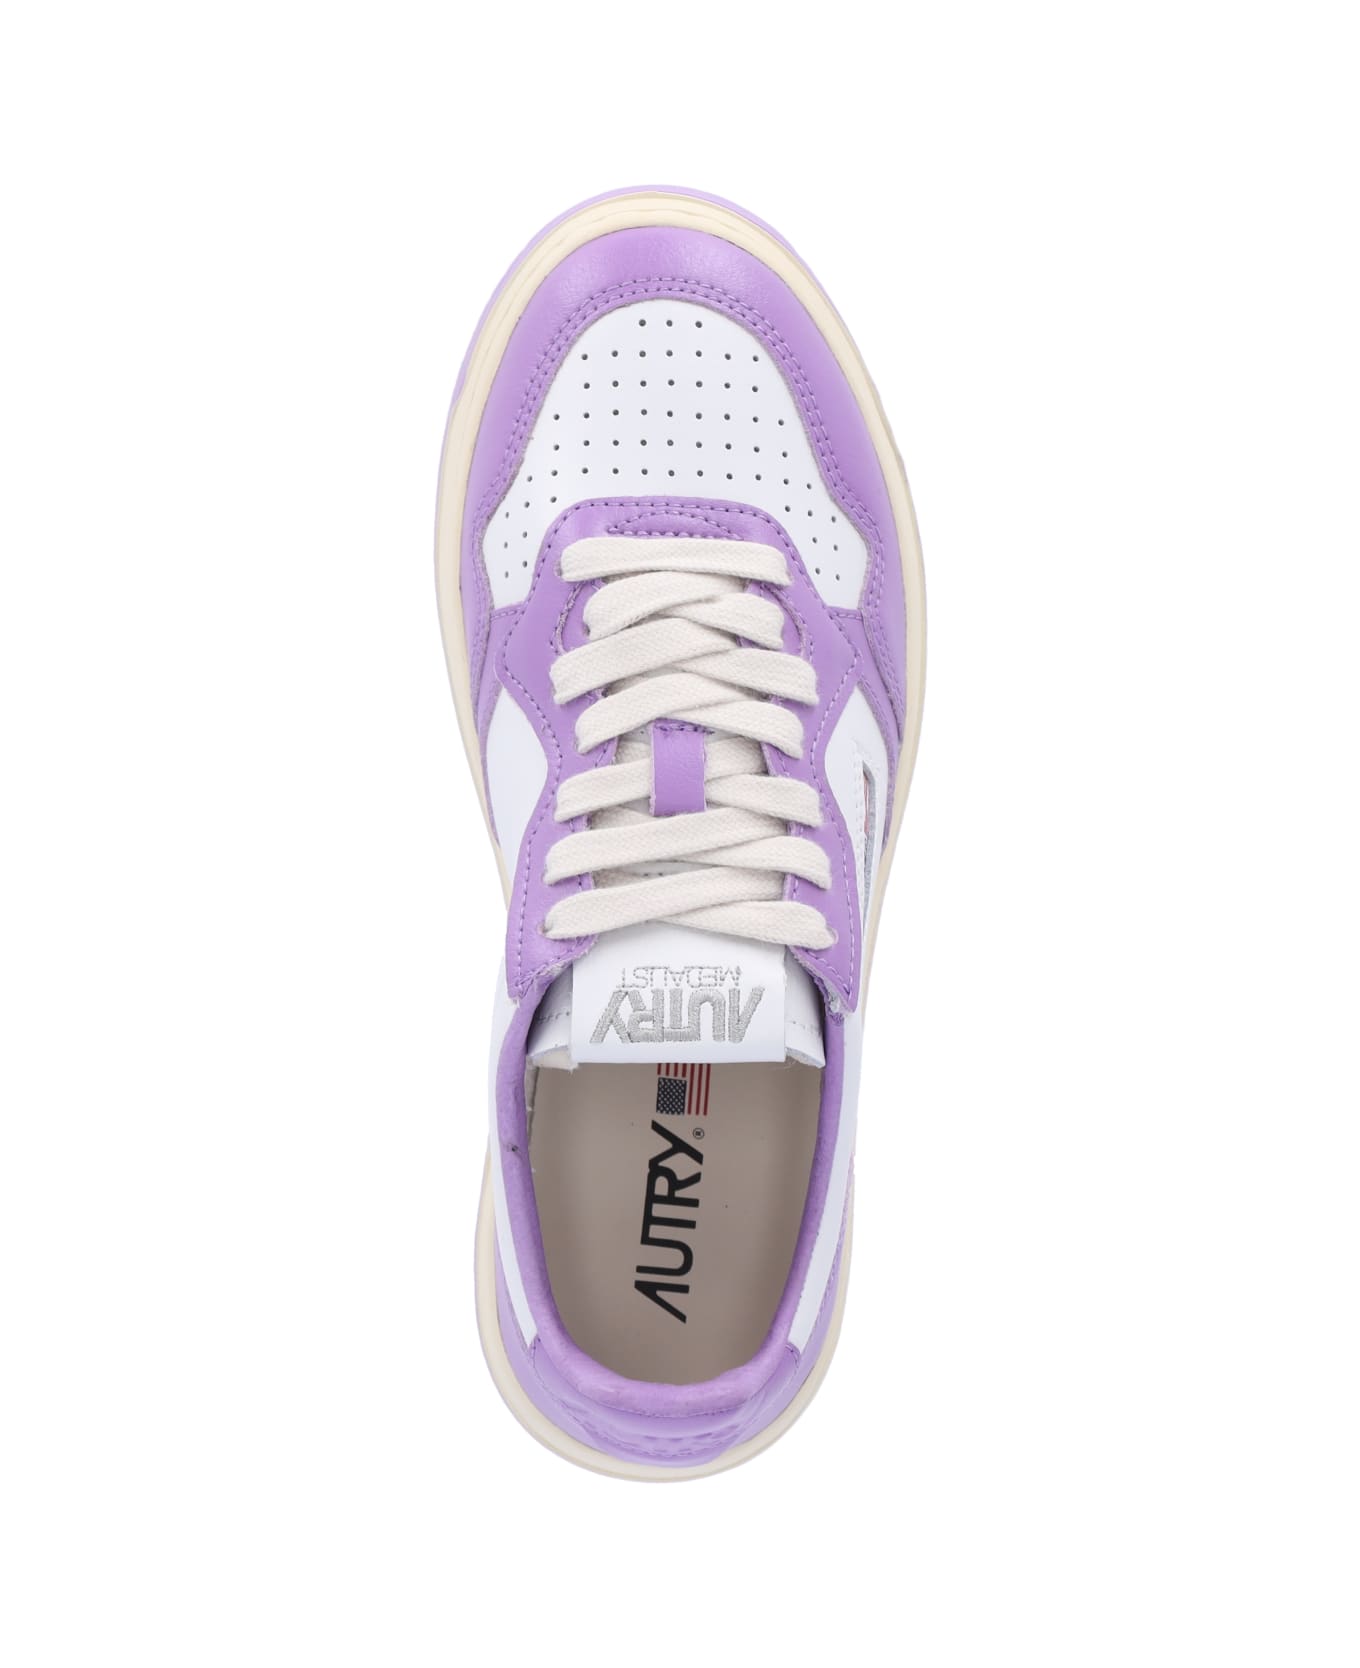 Autry Medialist Low Sneakers In White/purple Two-tone Leather - Violet スニーカー